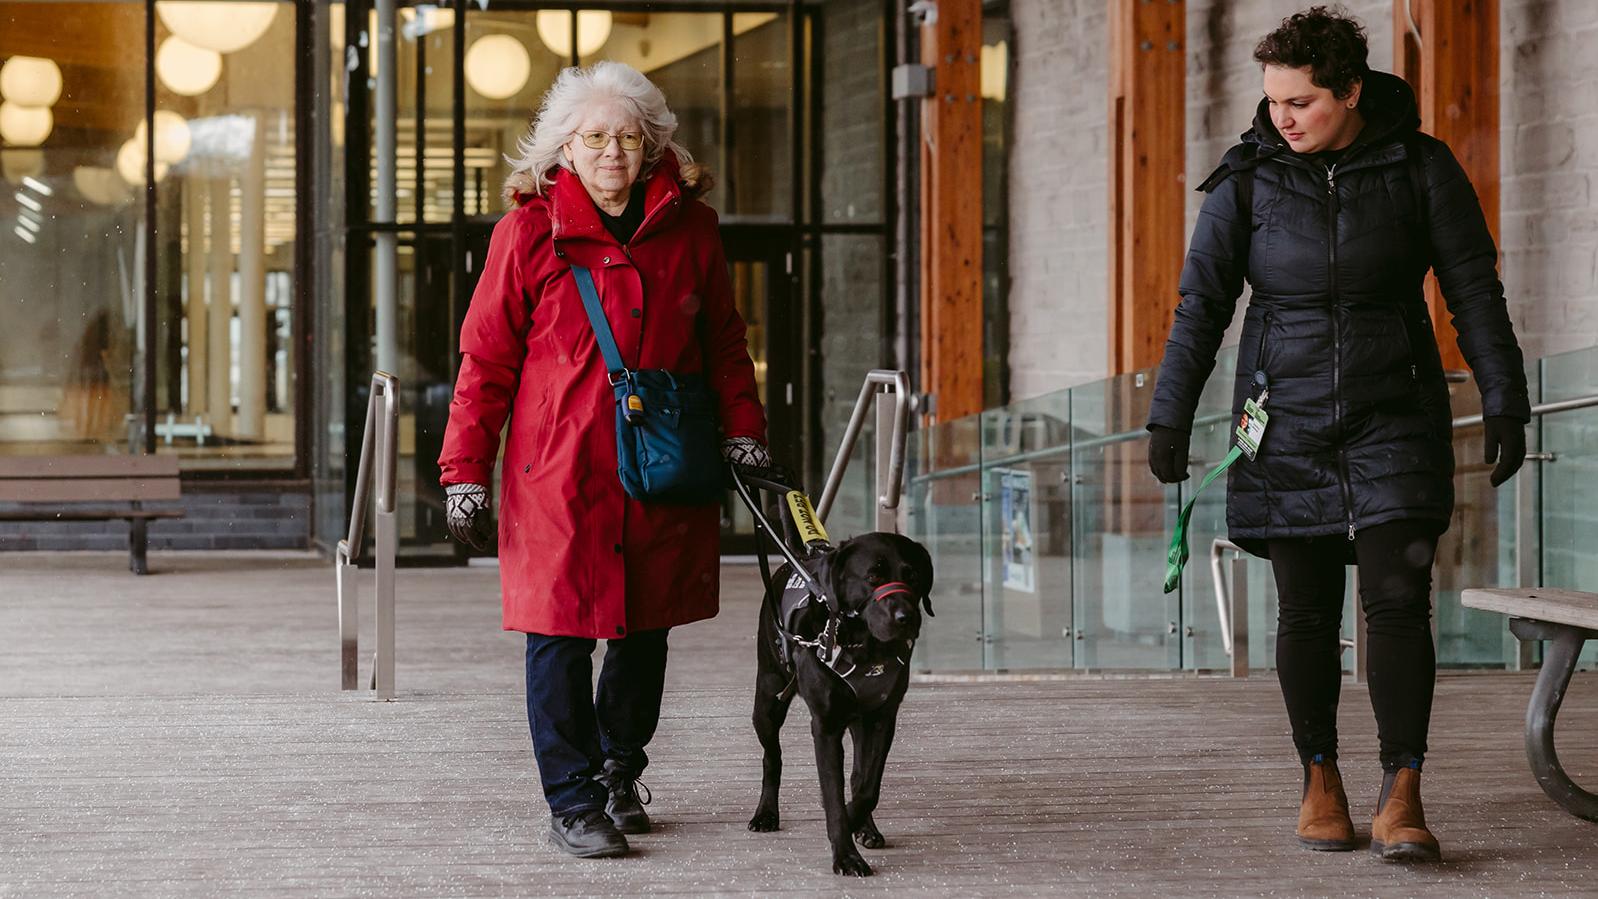 Cheri is guided outside of a building by her CNIB guide dog, Sassy, a black Labrador Retriever, who walks on her left side. Cheri’s female intervenor walks to the left of Sassy, observing her. The intervenor is wearing a winter coat.